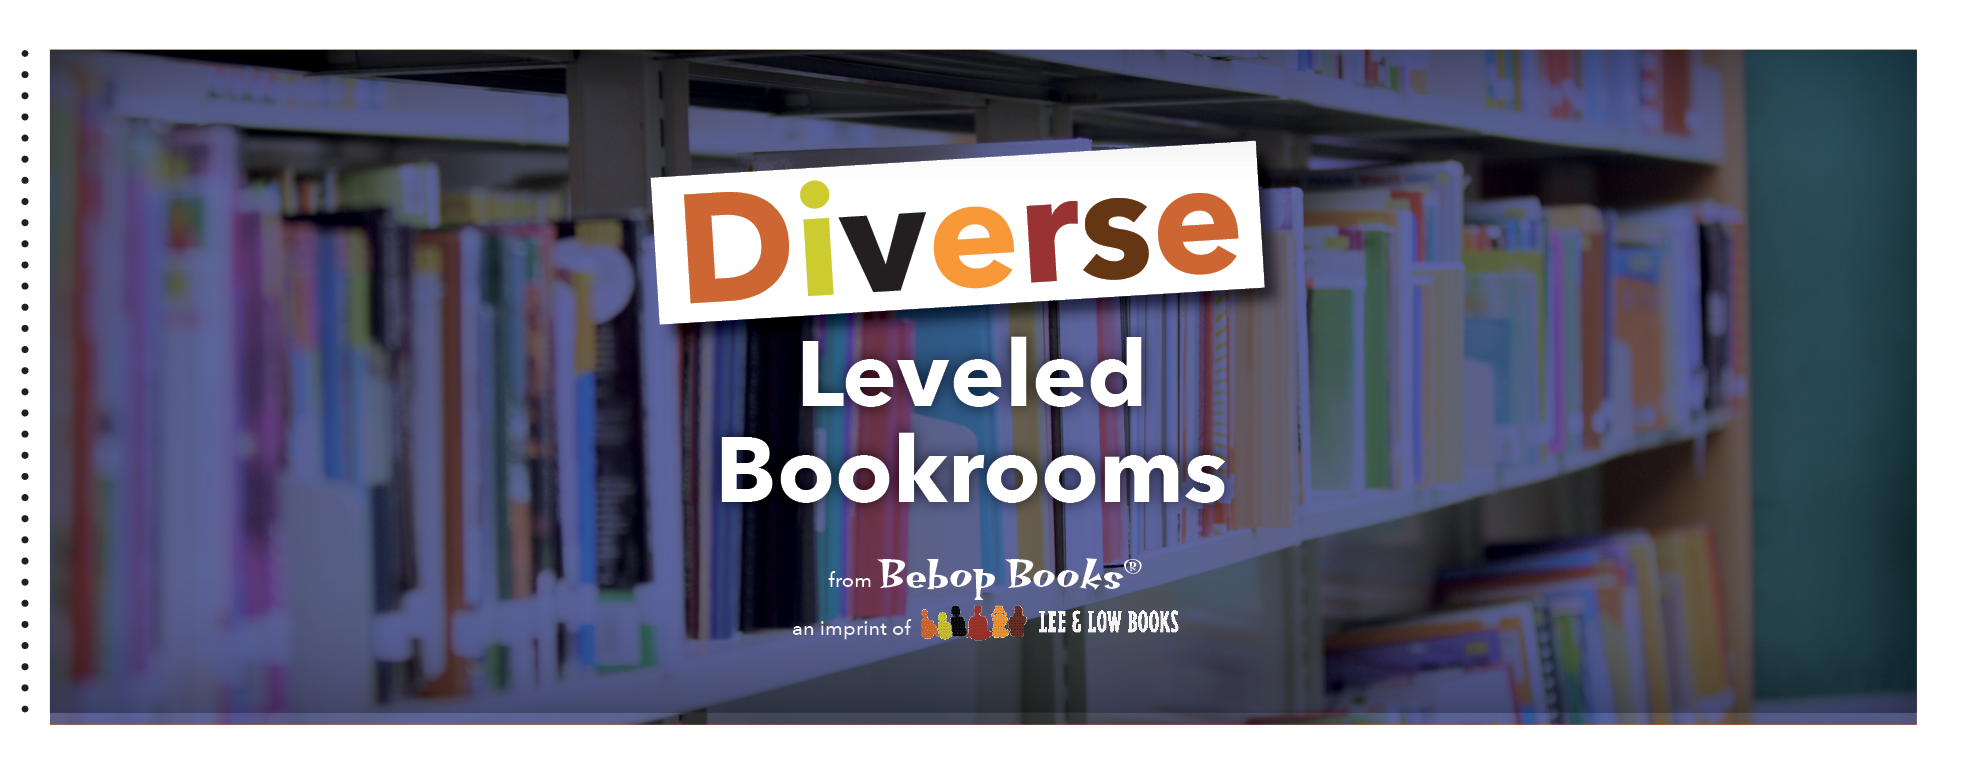 Diverse Leveled Bookrooms A Z Lee Low Books